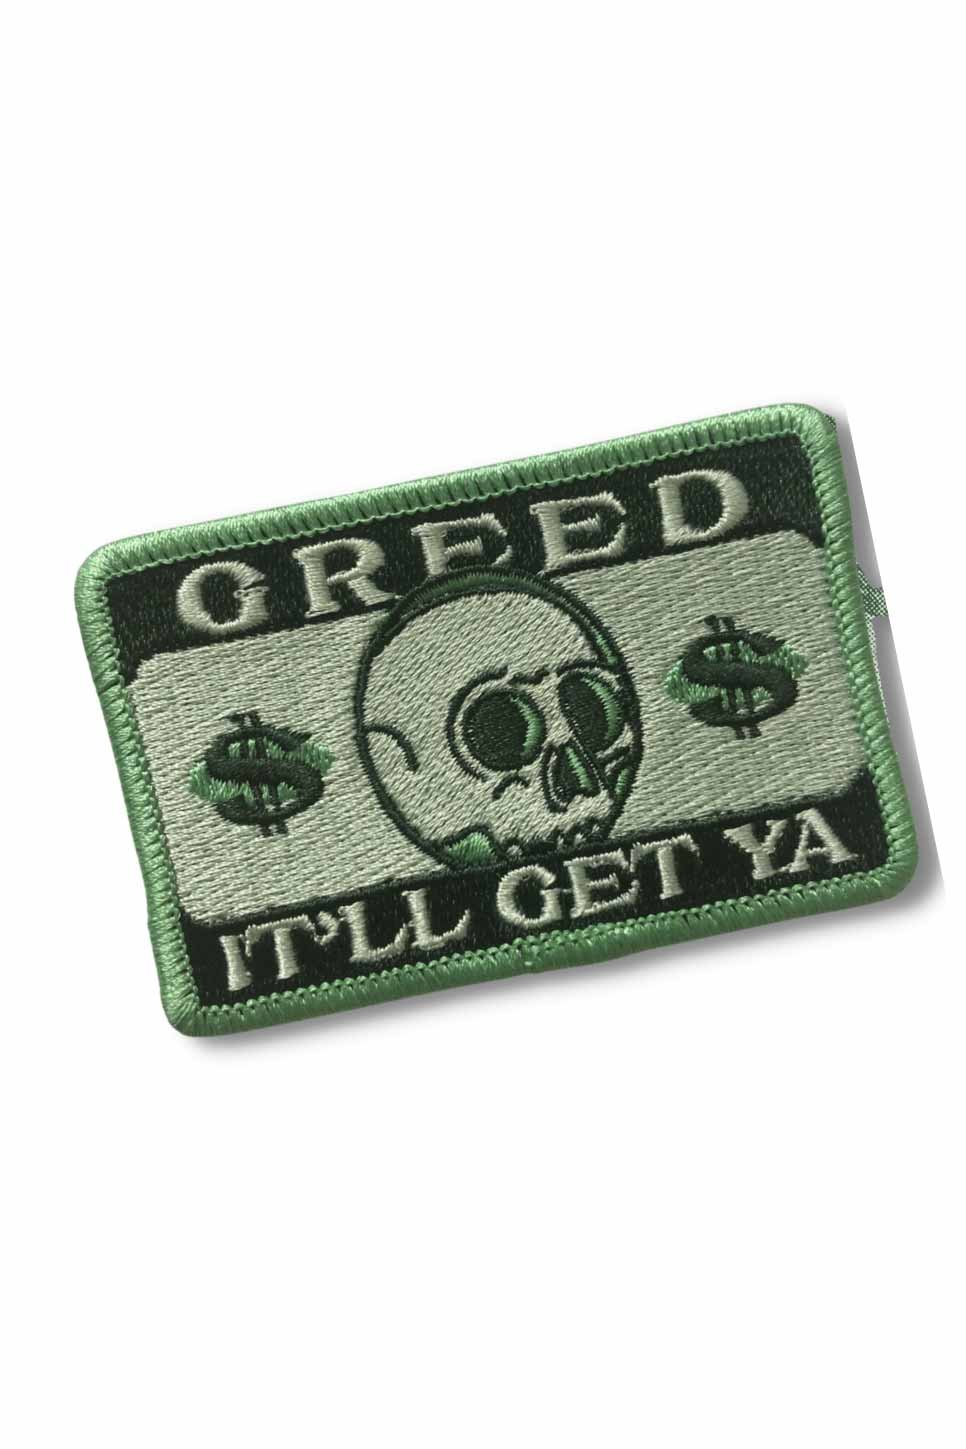 Outpatch - Greed Patch - Front